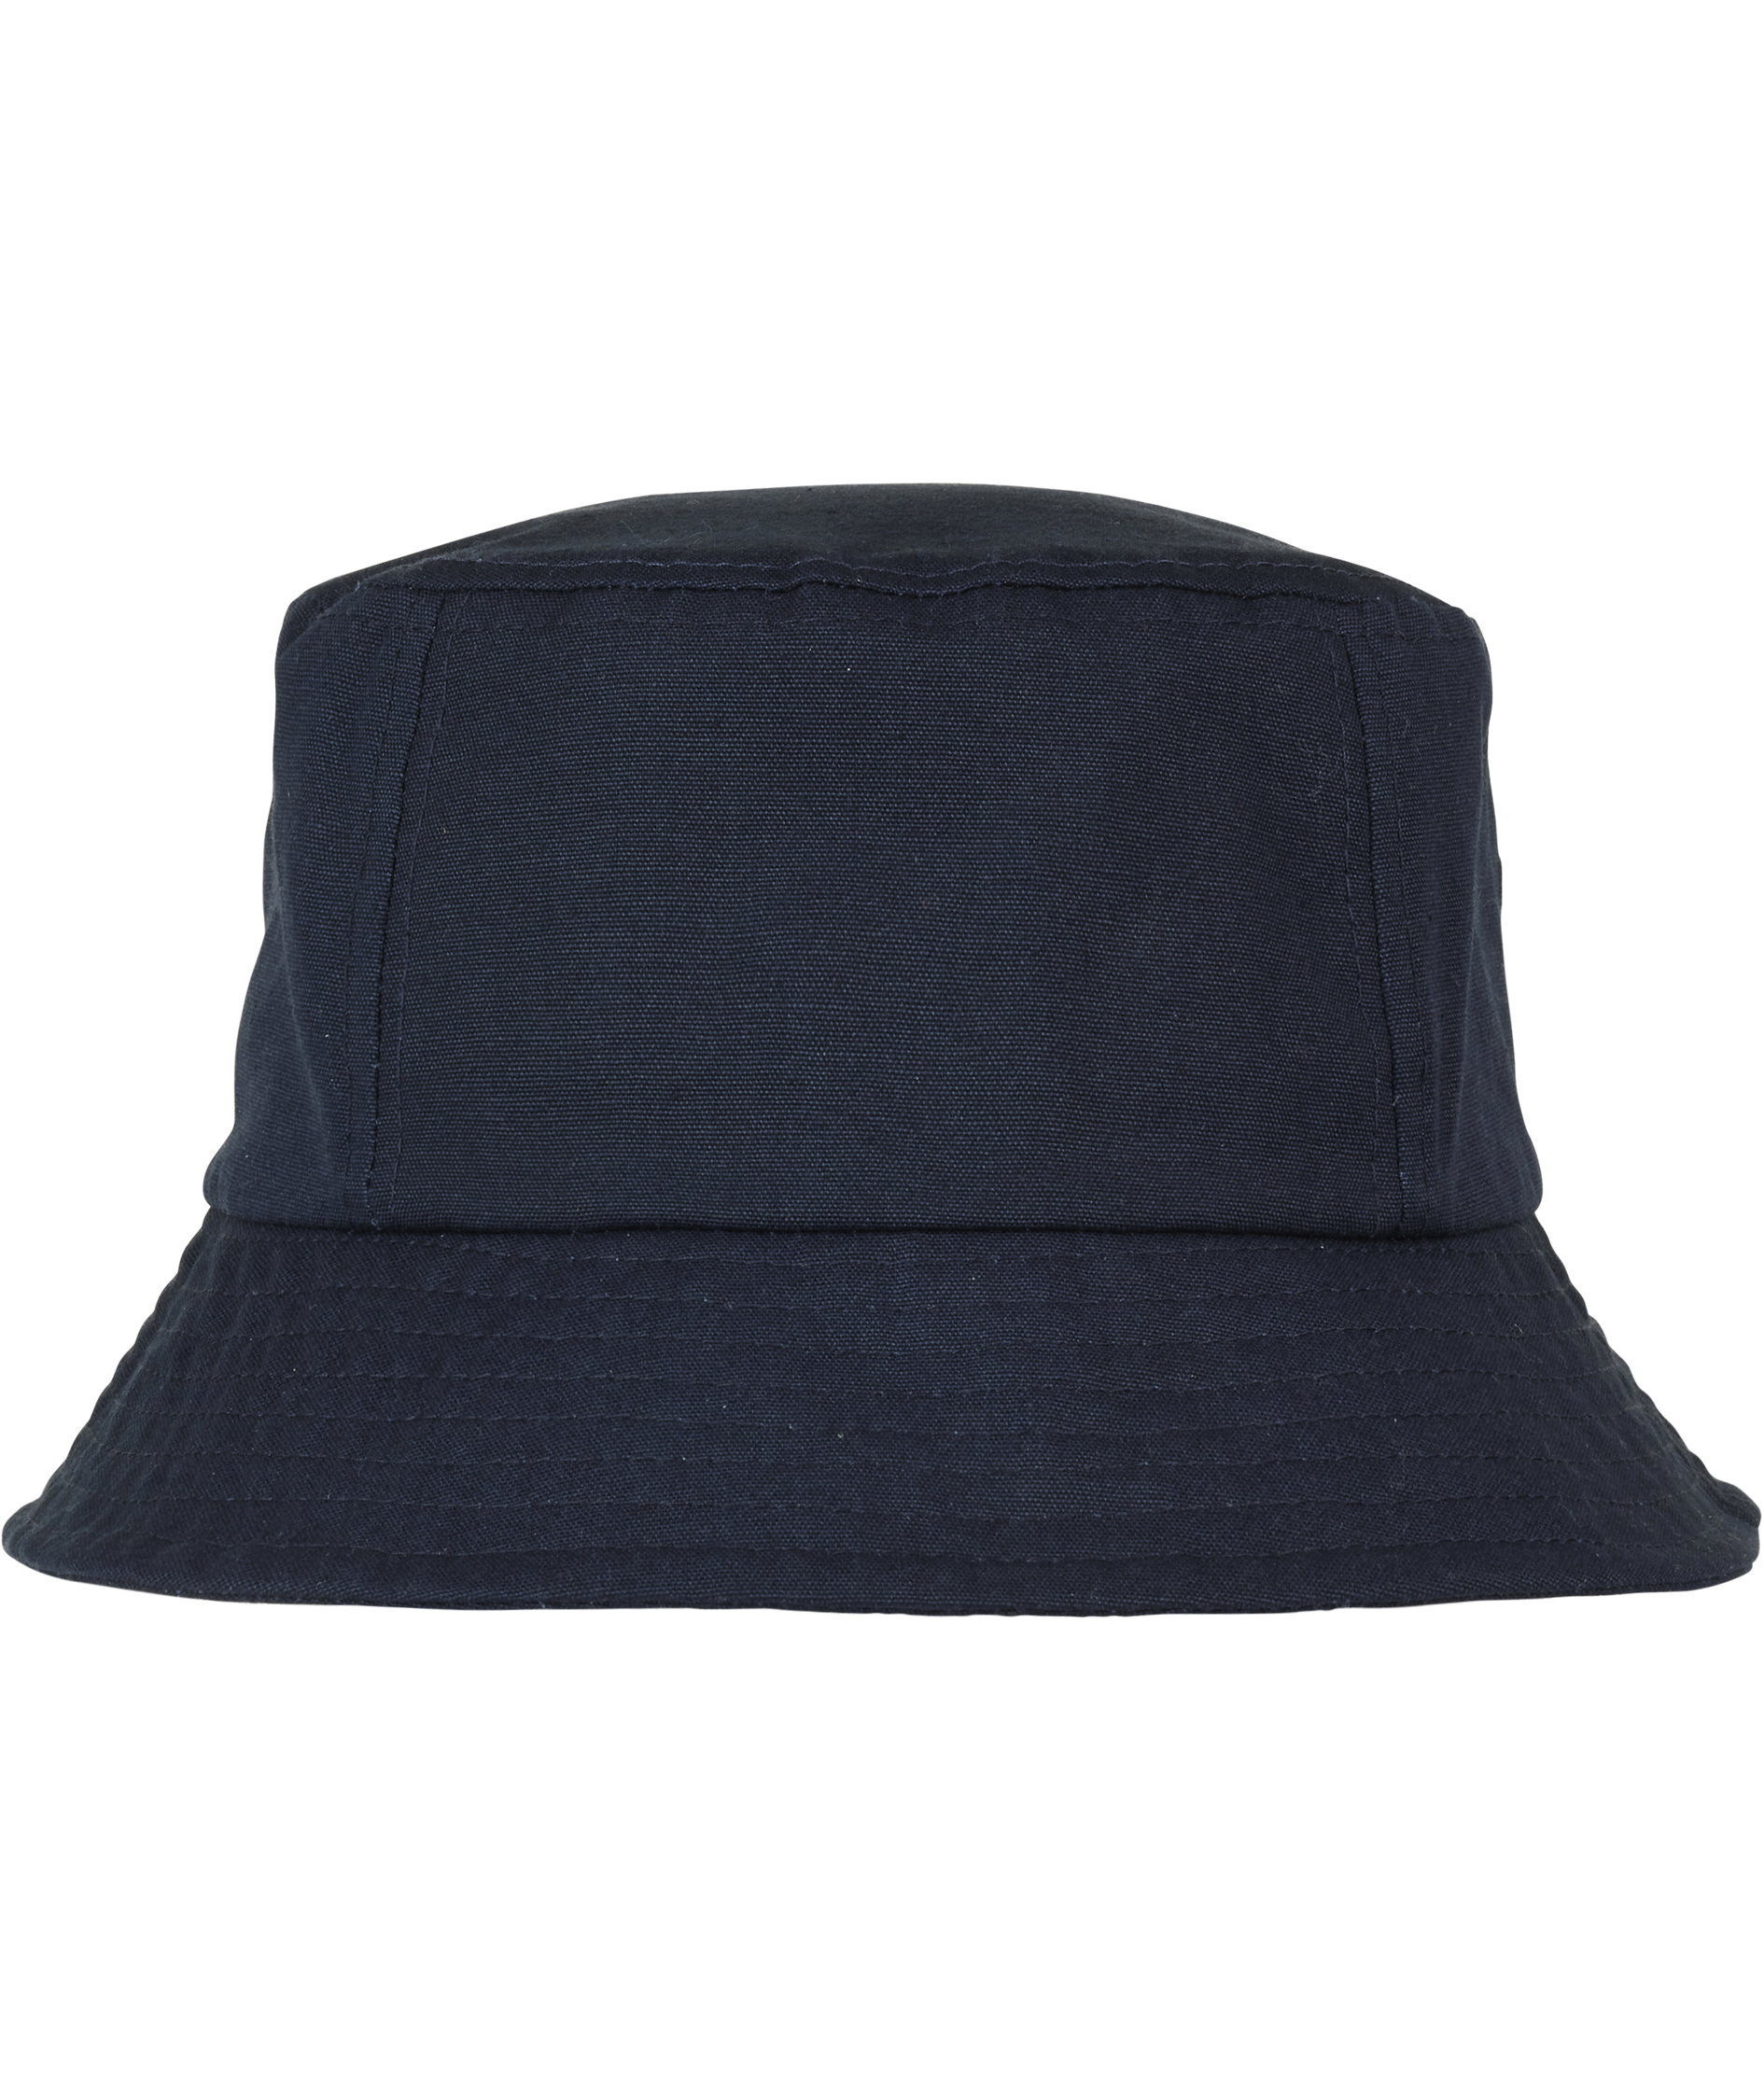 Bucket Hat | Buy your bucket hat at Cheap-workwear.com